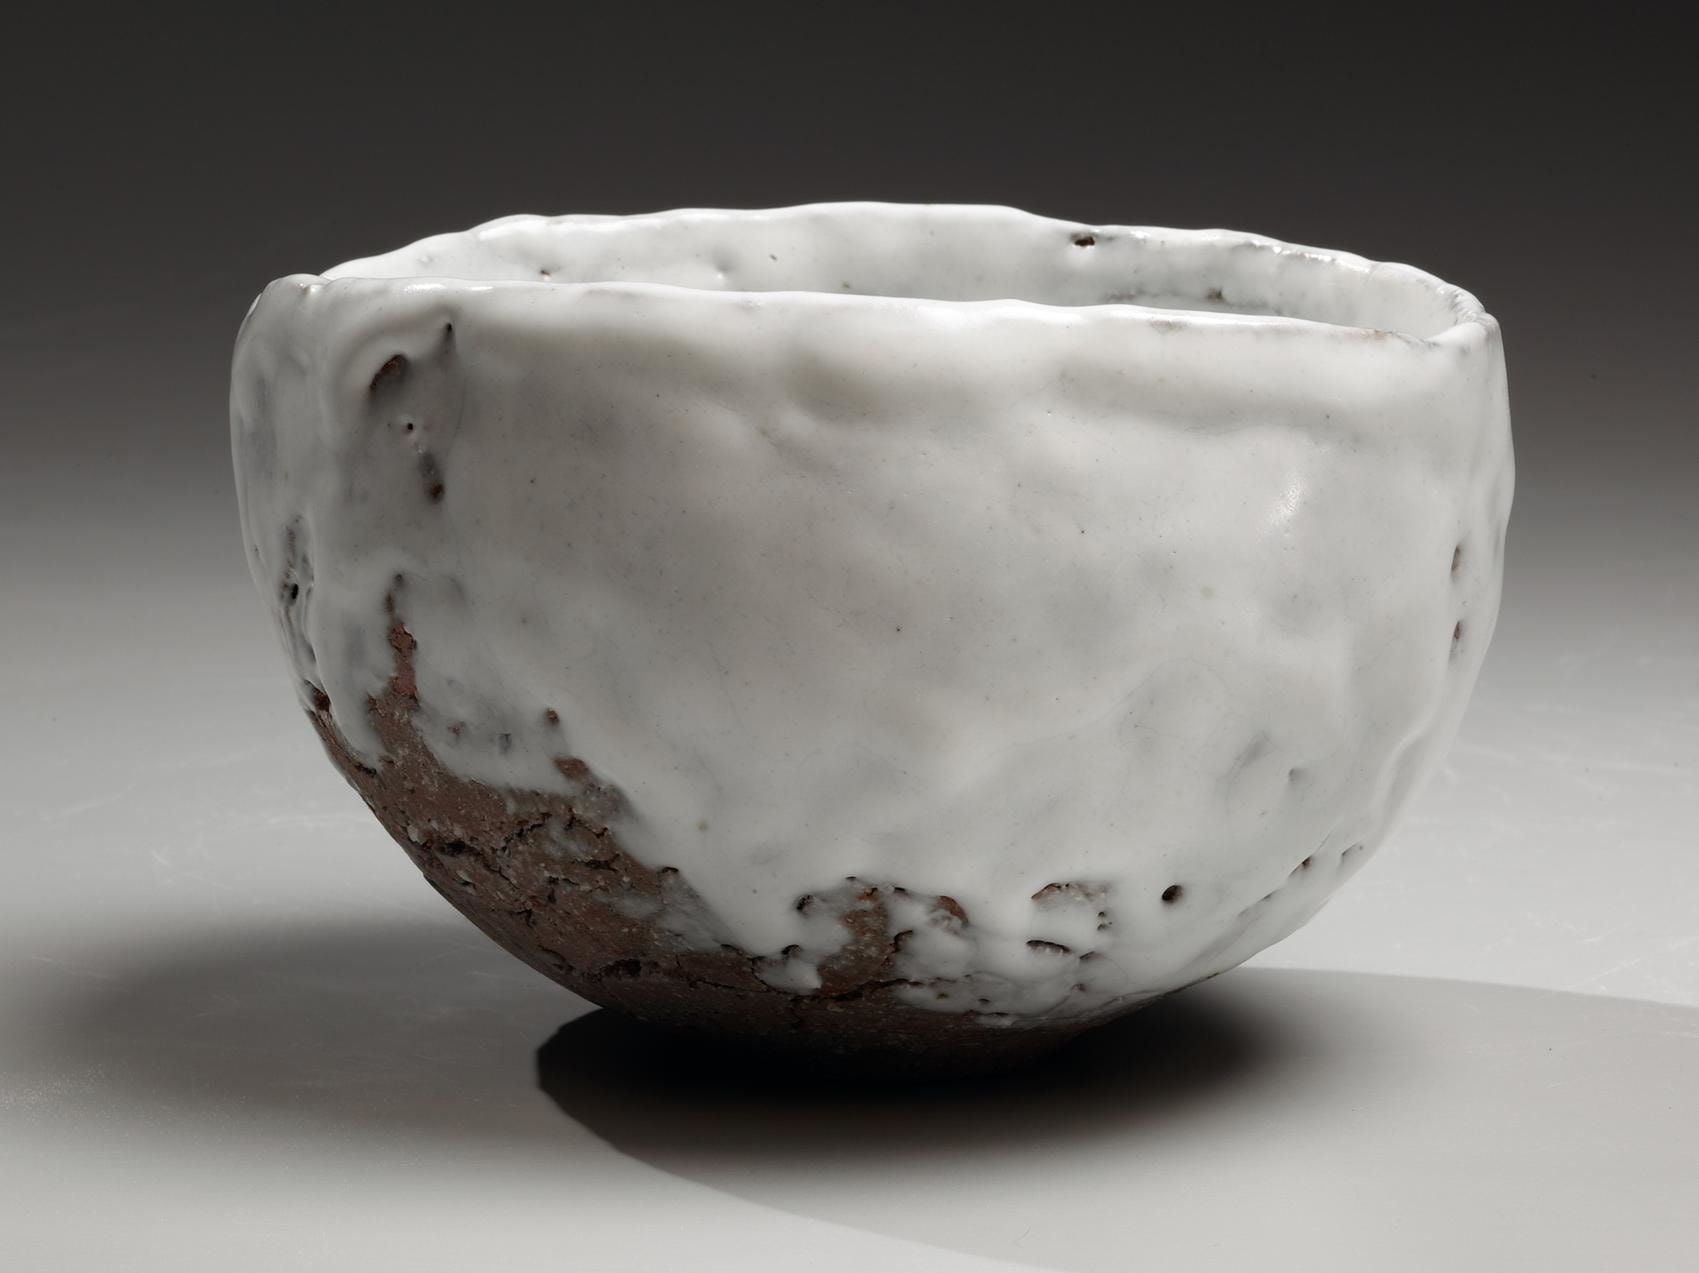 Round teabowl with unctuous white glaze over feldspar-infused crackled clay body